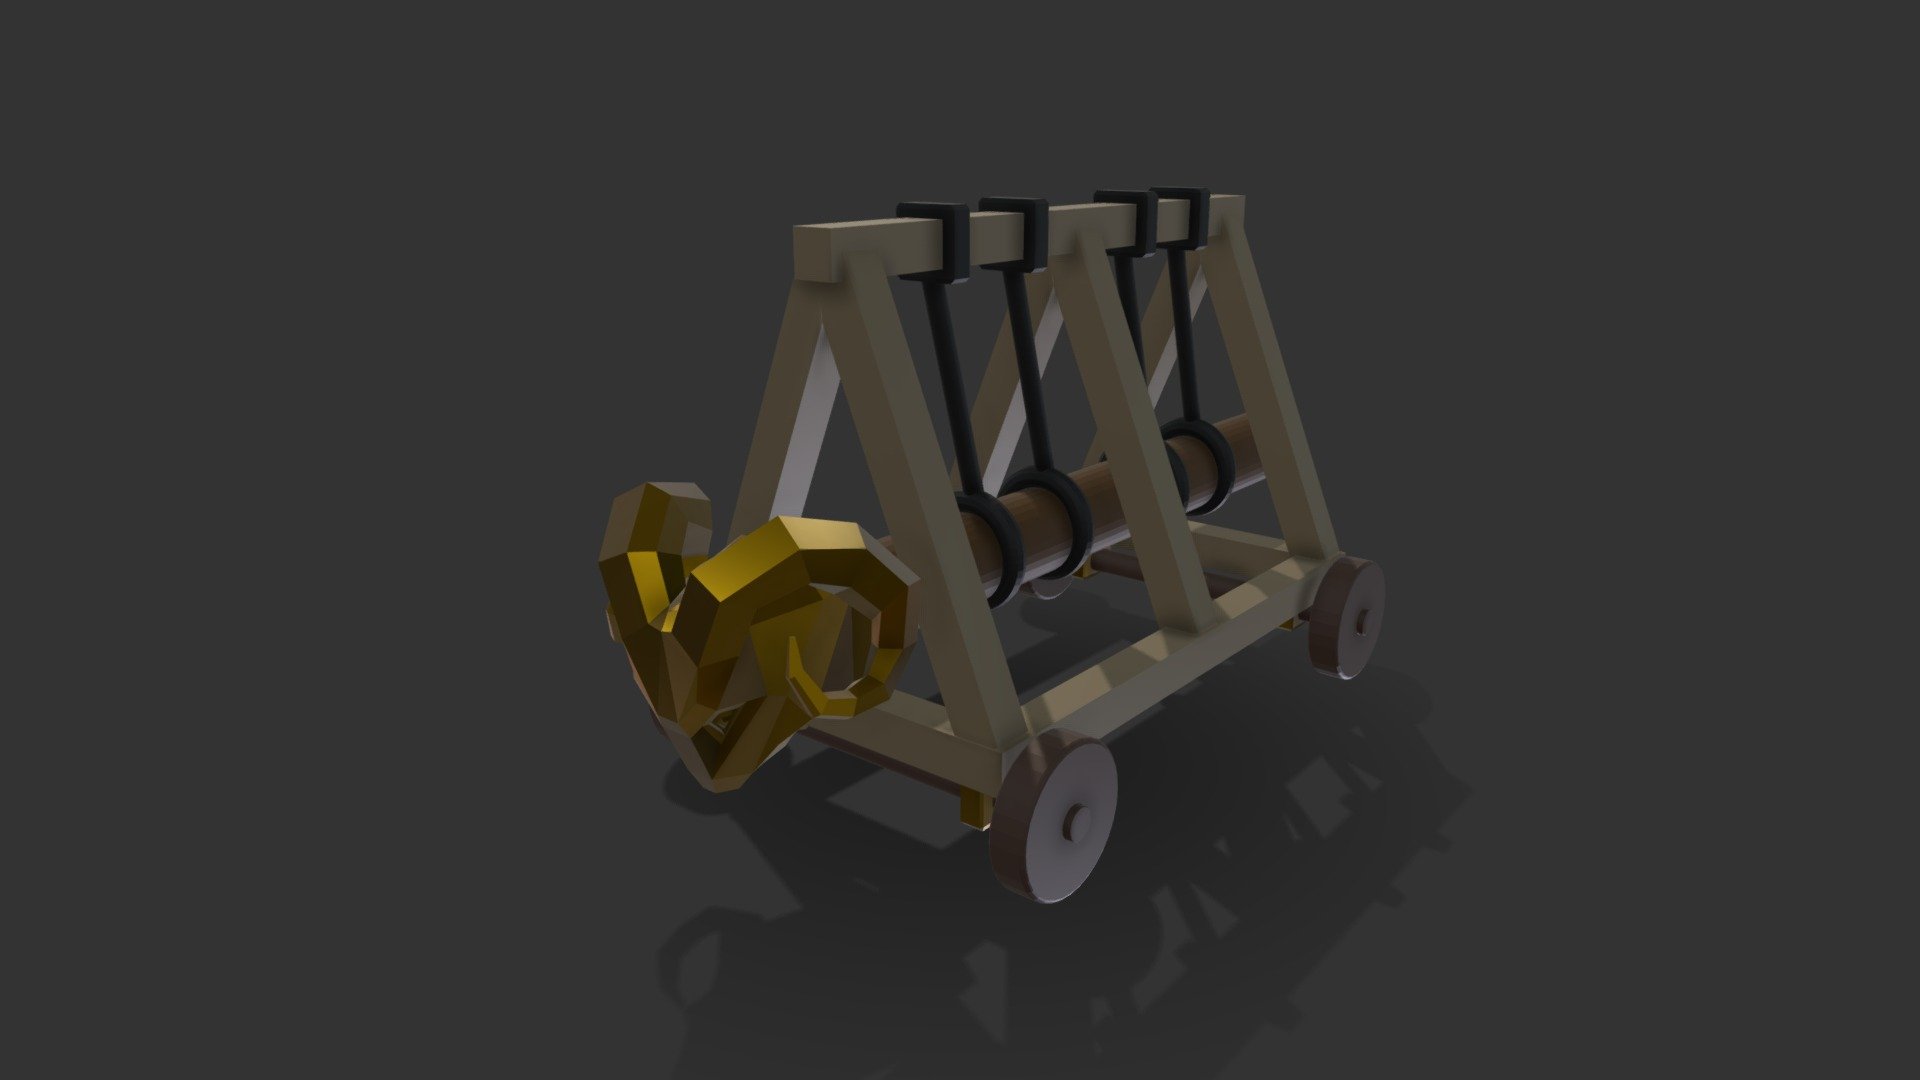 Made in Blender for the Sketchfab &amp; @mozilla Medieval Fantasy contest
textures done in Inkscape - Battering Ram Rams Head - Buy Royalty Free 3D model by Chaitanya Krishnan (@chaitanyak) 3d model